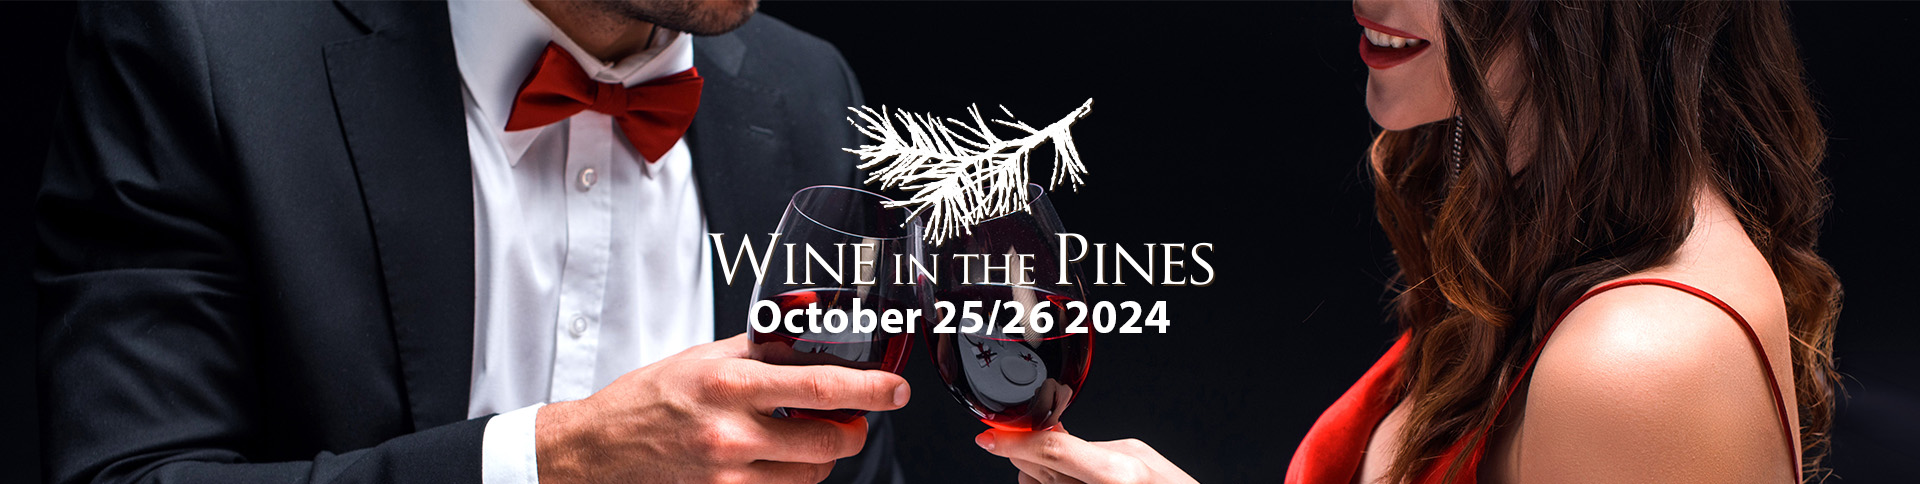 40th Annual Wine in the Pines